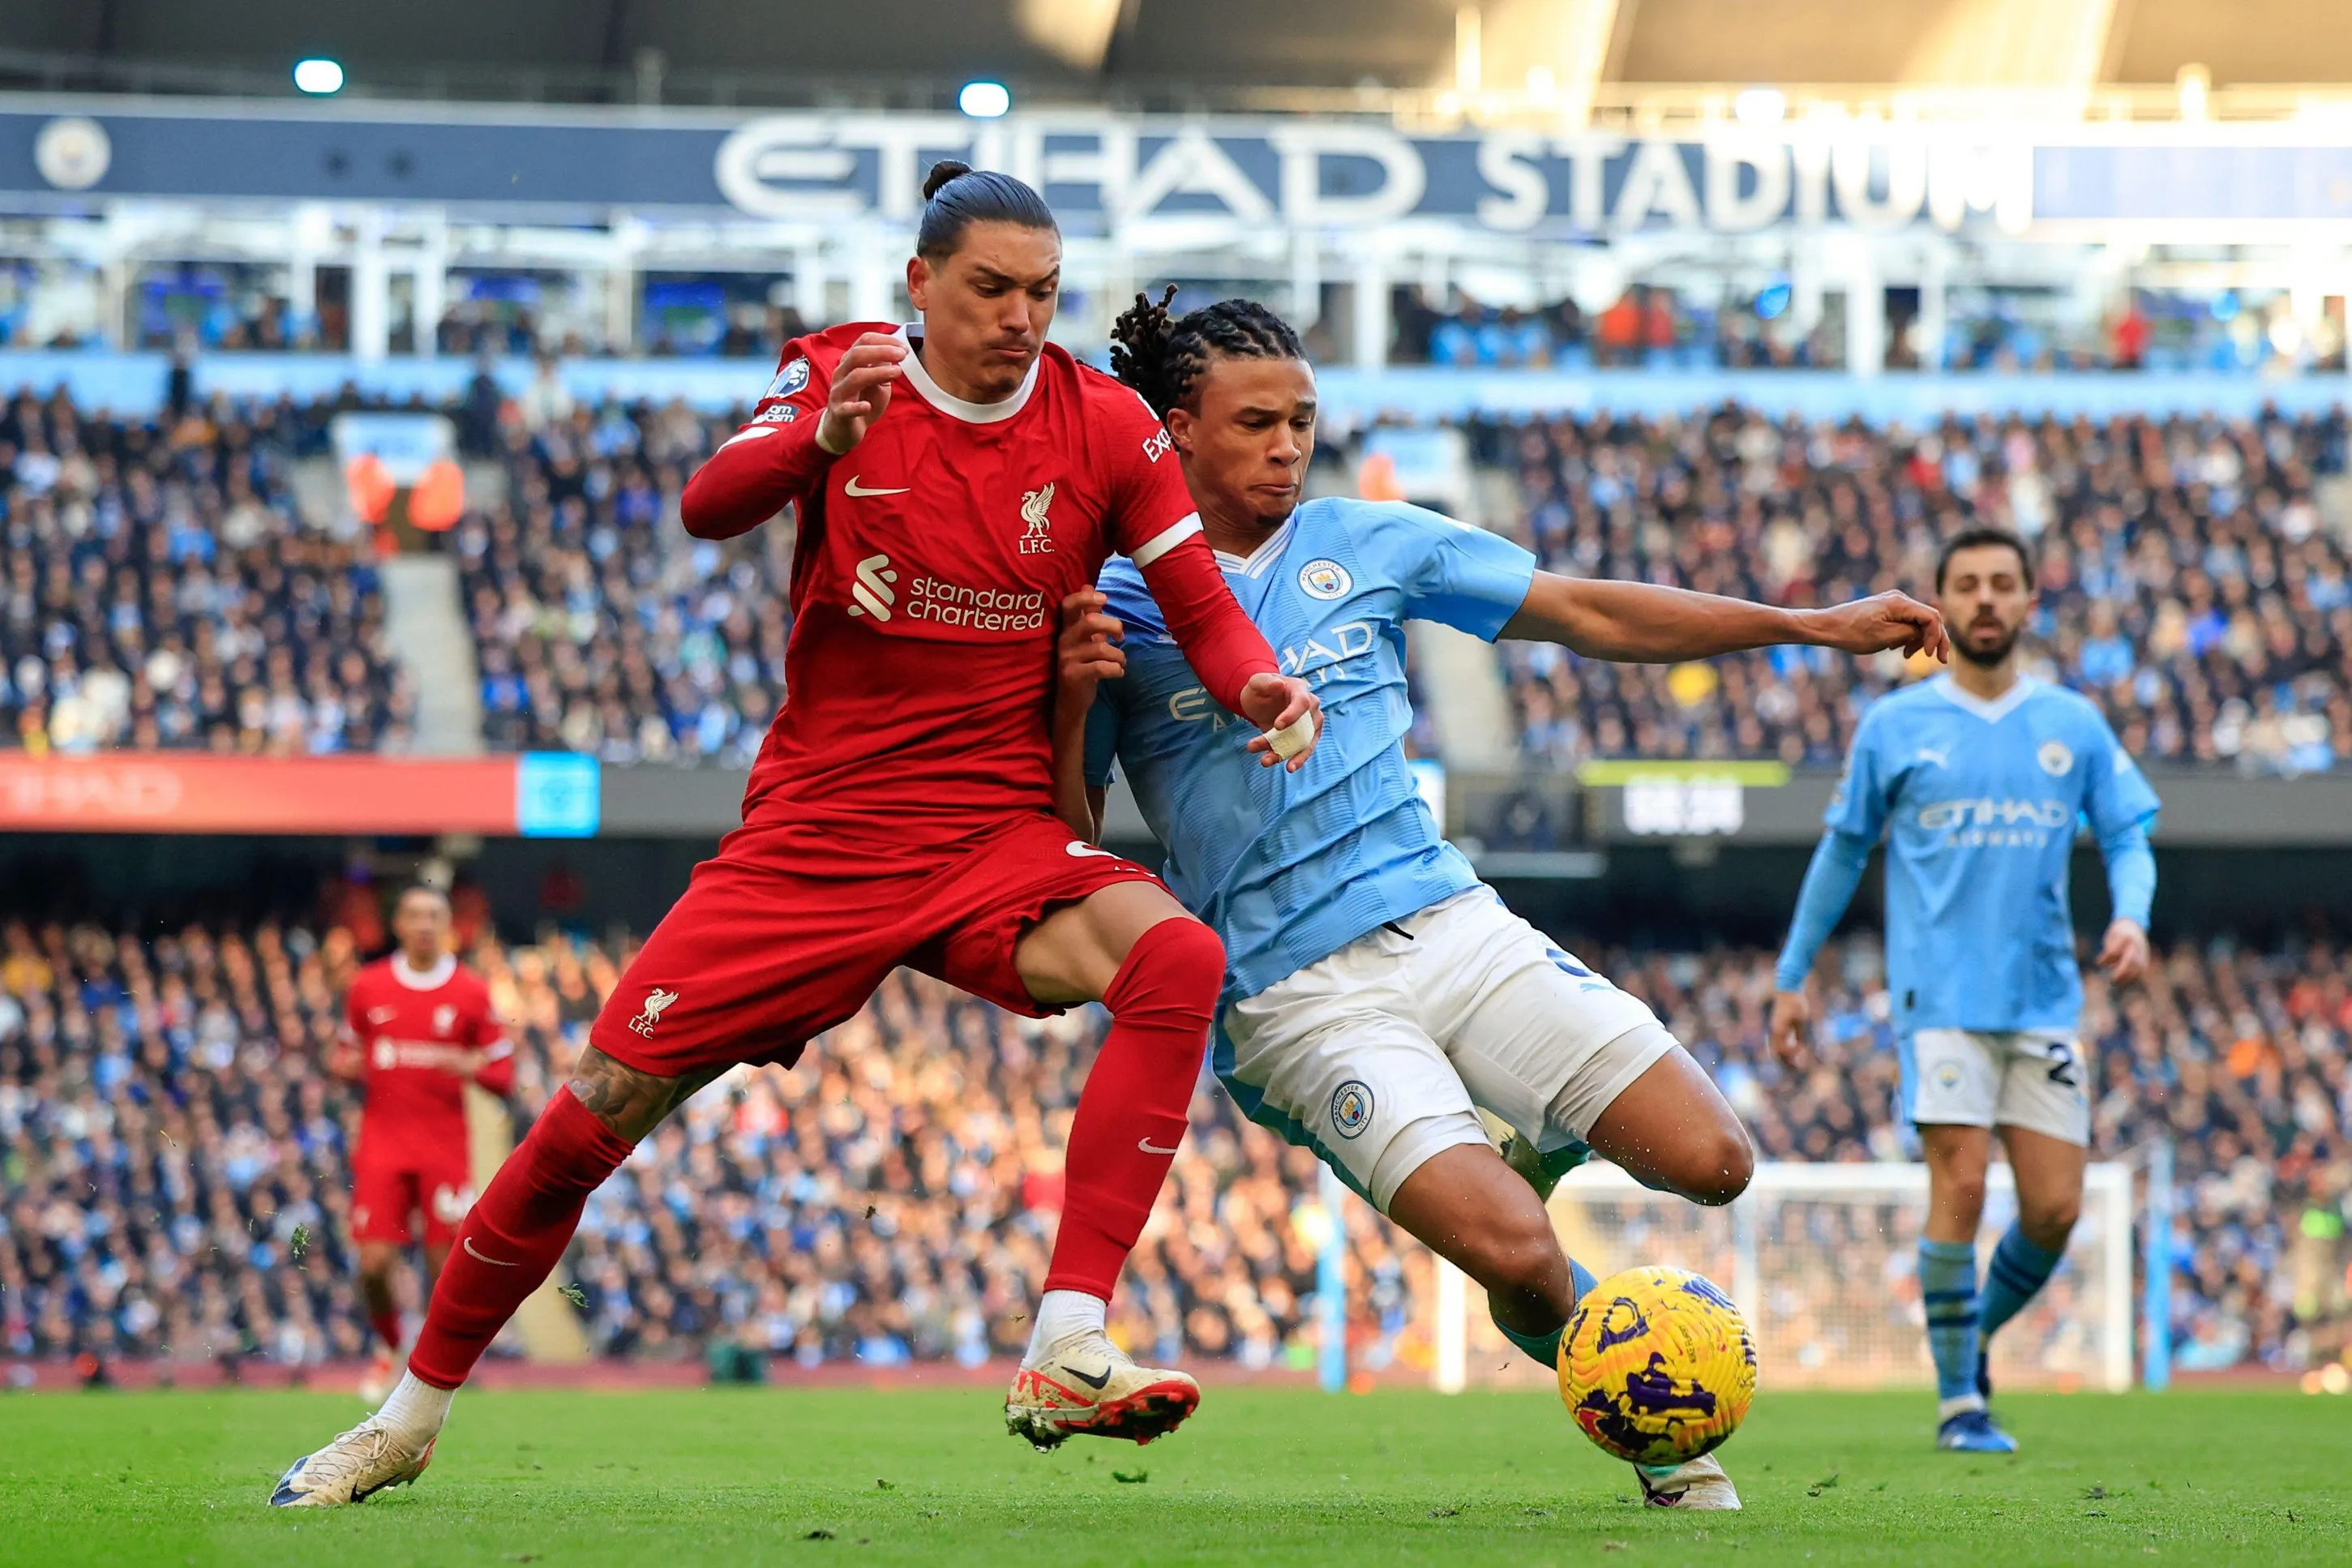 Liverpool vs Manchester City Preview